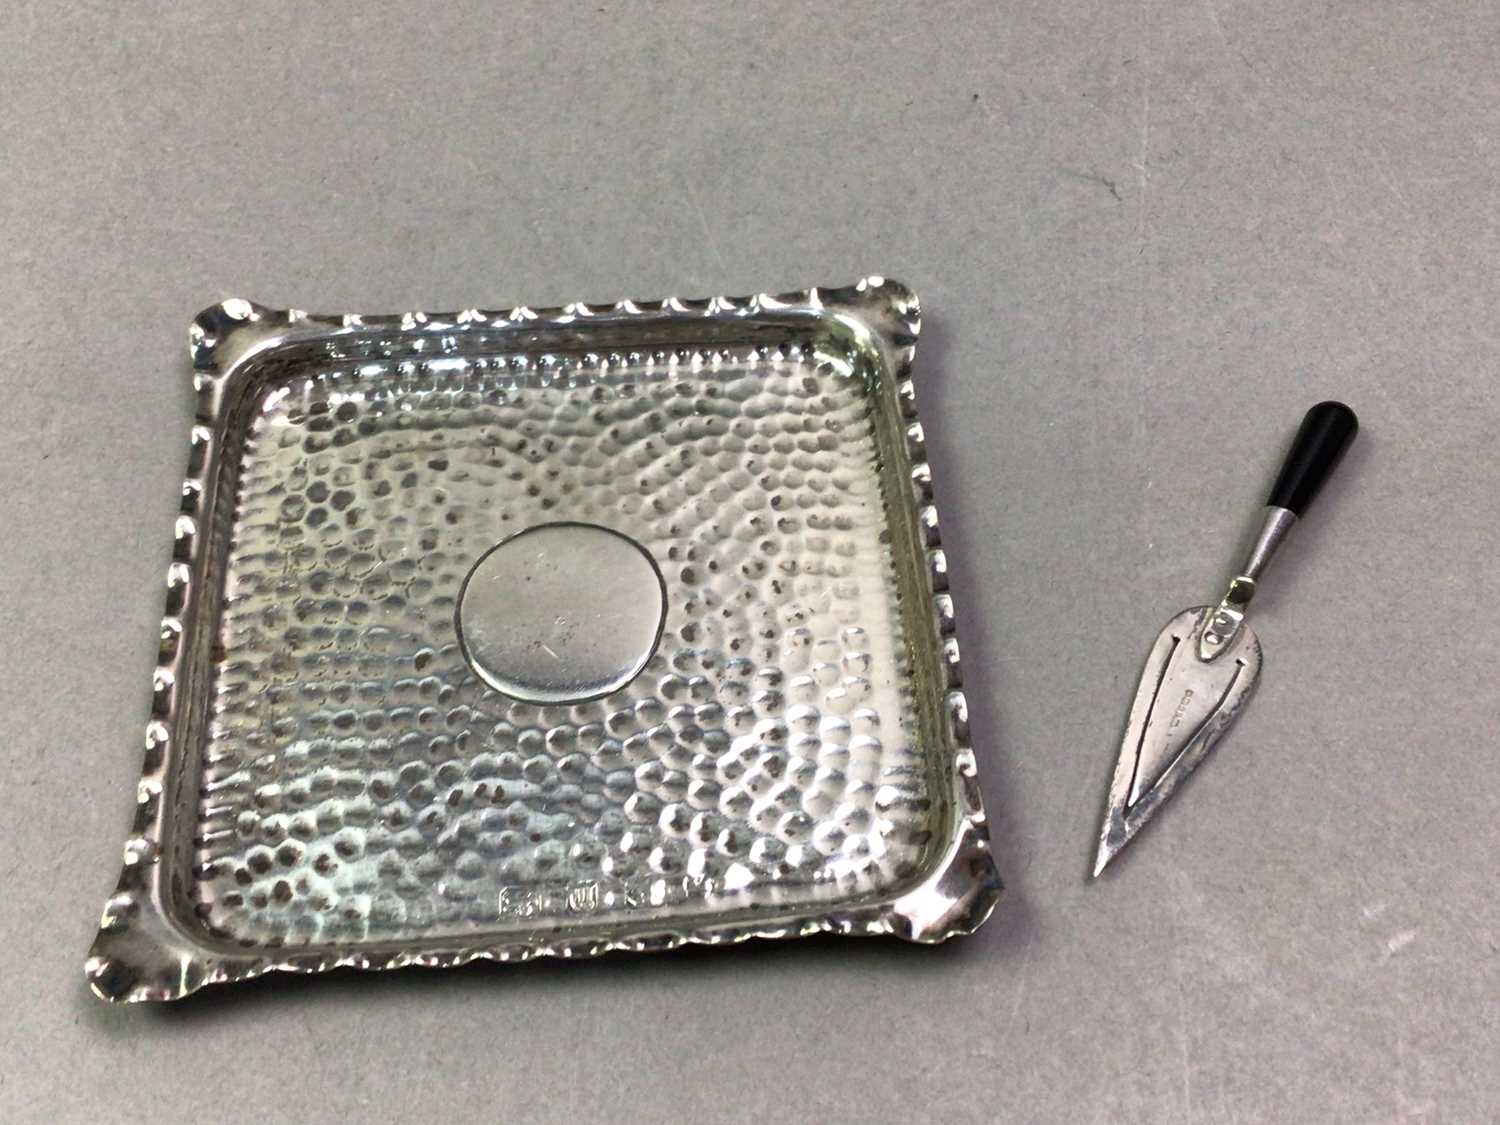 EDWARDIAN MOTHER OF PEARL CARD CASE ALONG WITH A SILVER TRAY AND STAMP LIFT - Image 2 of 2